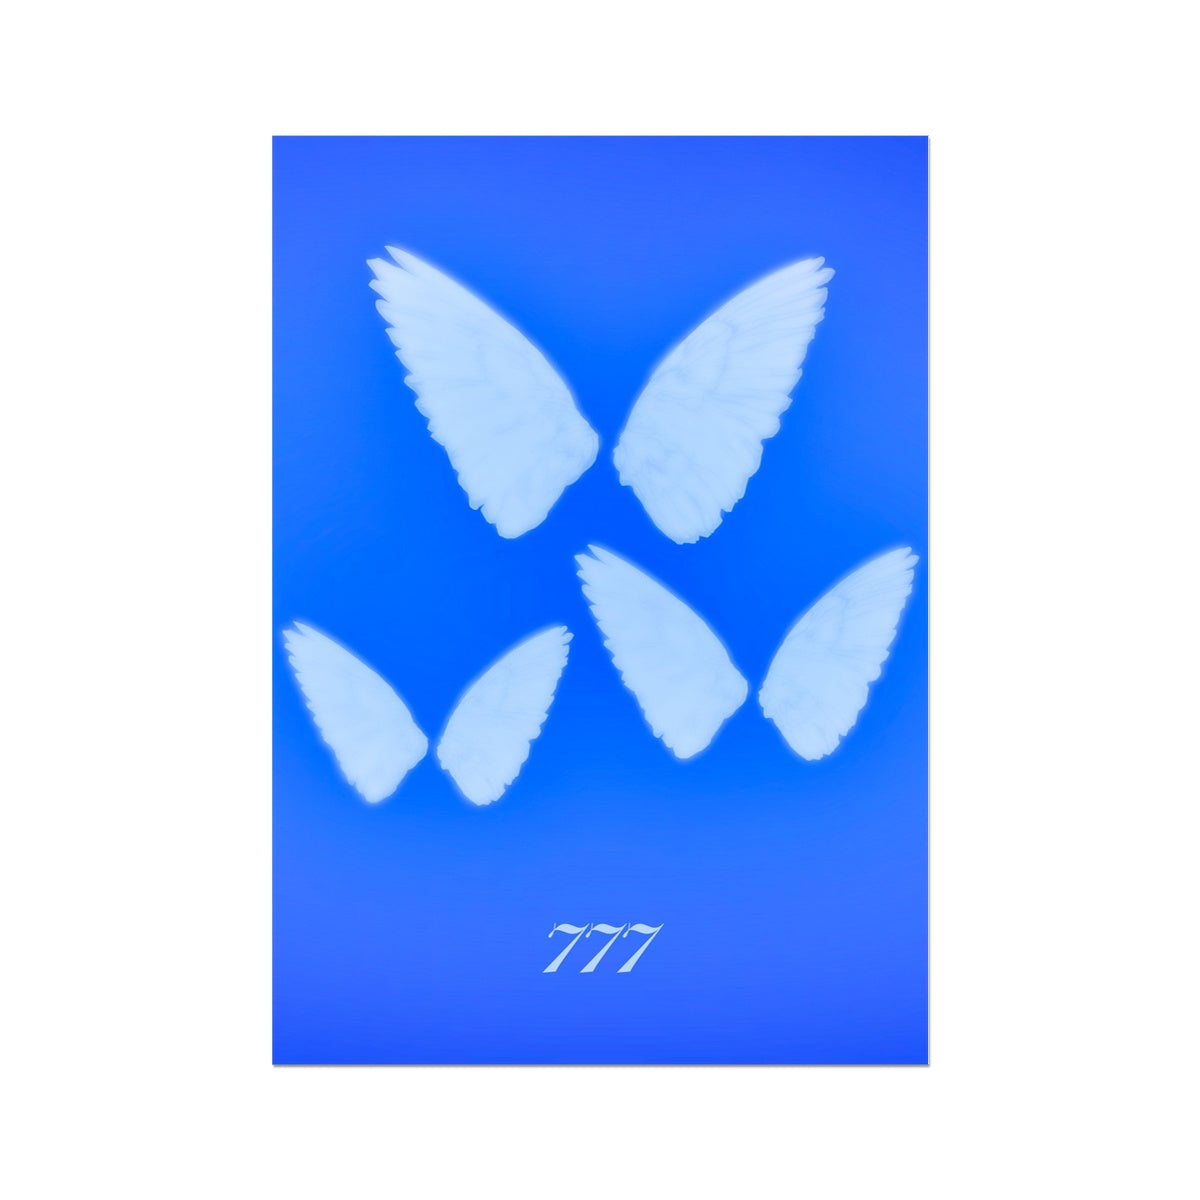 An angel number art print with a gradient aura. Add a touch of angel energy to your walls with a angel number auras. The perfect wall art posters to create a soft and dreamy aesthetic with your apartment or dorm decor. 777 Luck: Wonderful Things Are About To Happen